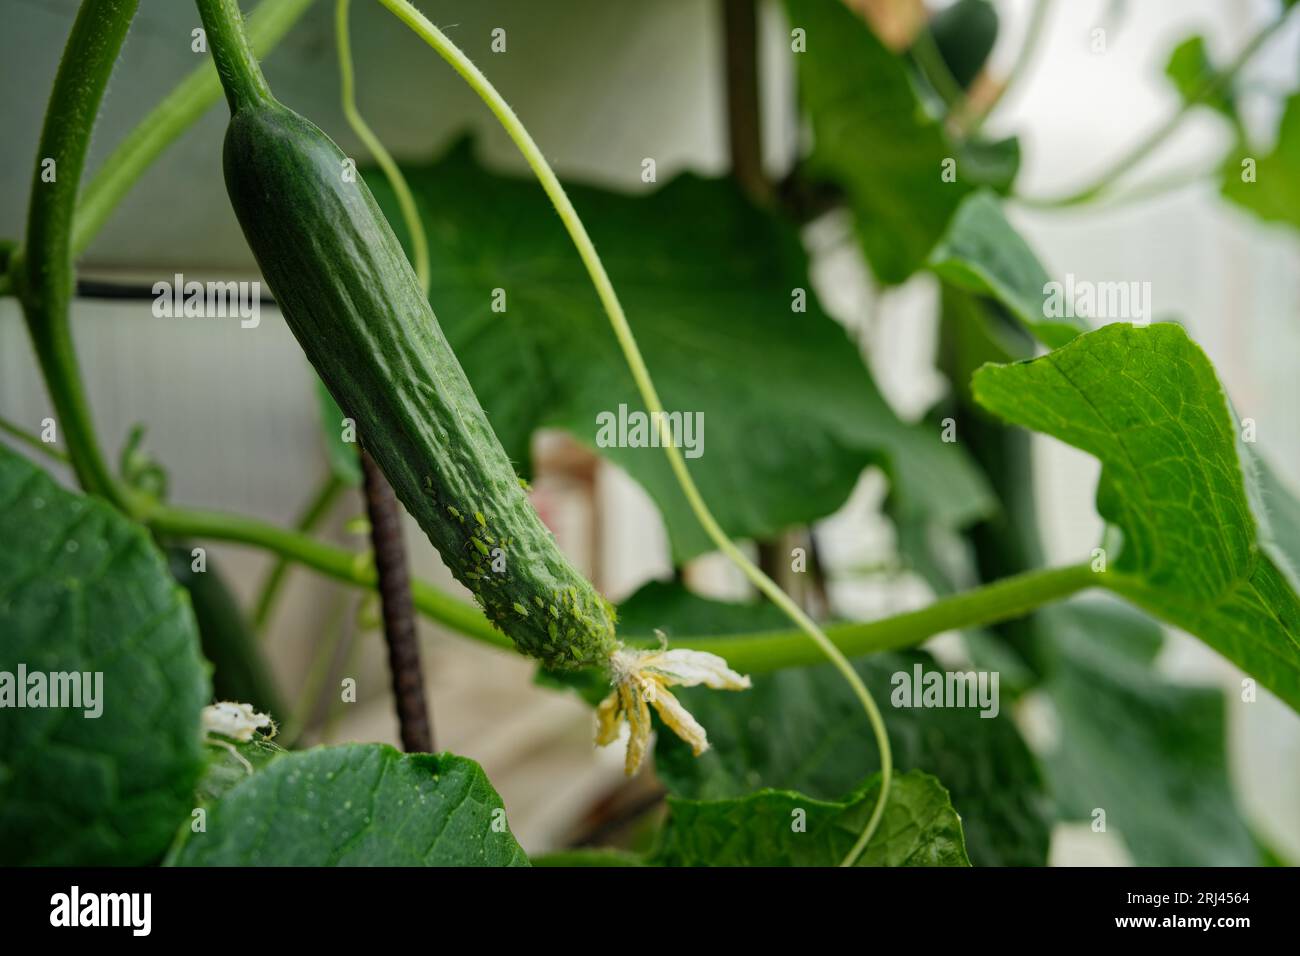 A close-up of a cucumber being infested with pests in the greenhouse Stock Photo